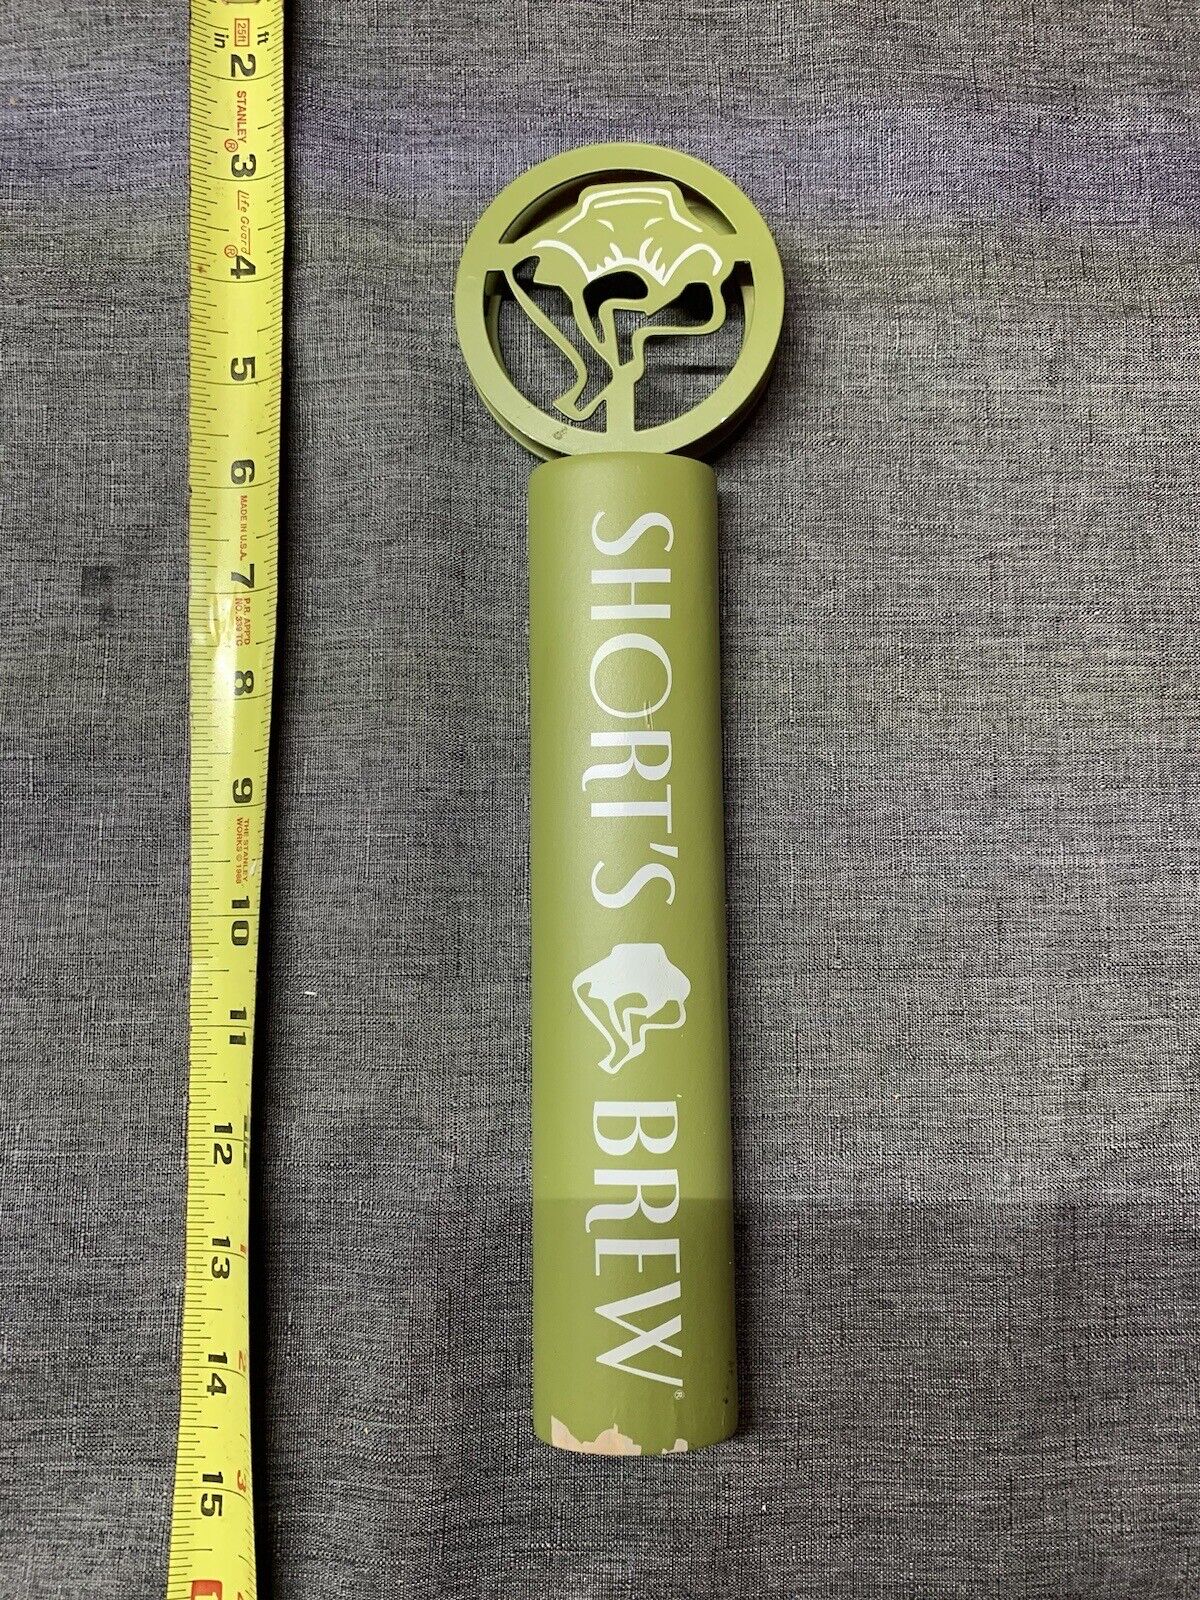 Shorts Brewing Company Beer Tap Handle